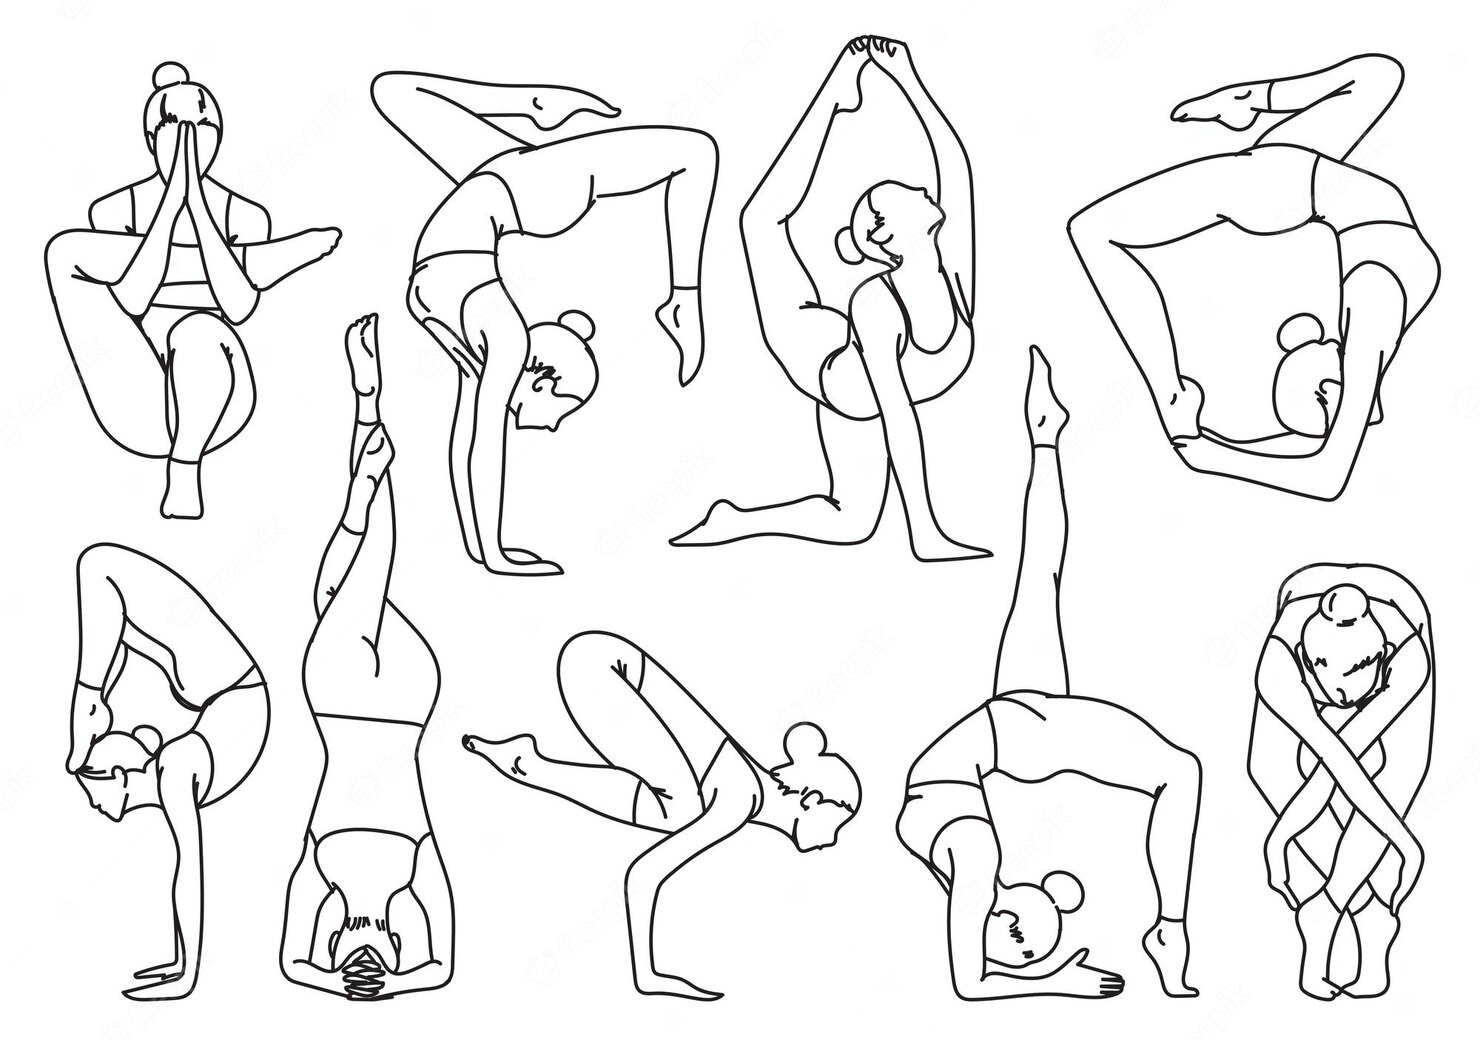 Silhouettes Girl Practicing Yoga Stretching Exercises Hand Drawing Sketch Coloring Pages